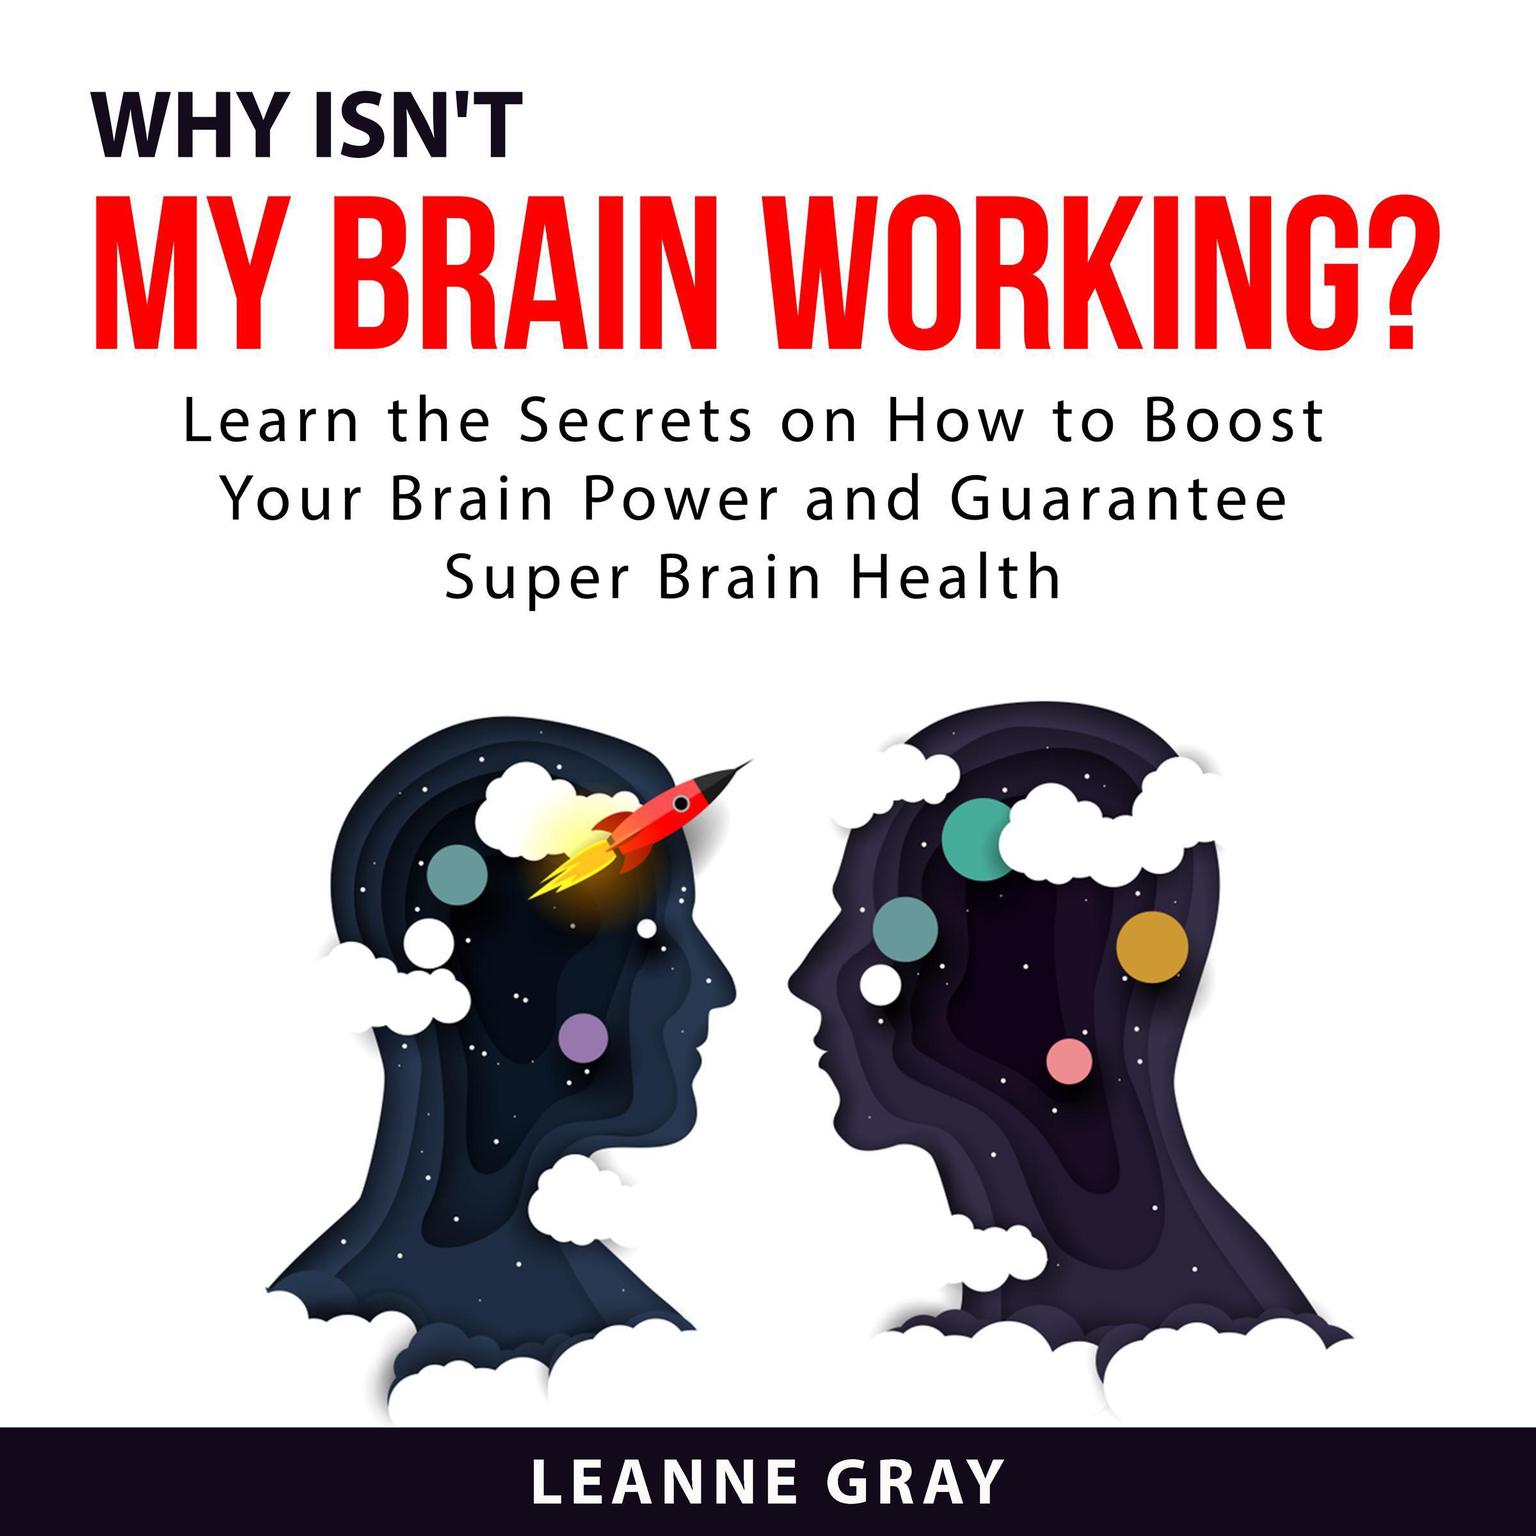 Why Isnt My Brain Working? Learn the Secrets on How to Boost Your Brain Power and Guarantee Super Brain Health Audiobook, by Leanne Gray